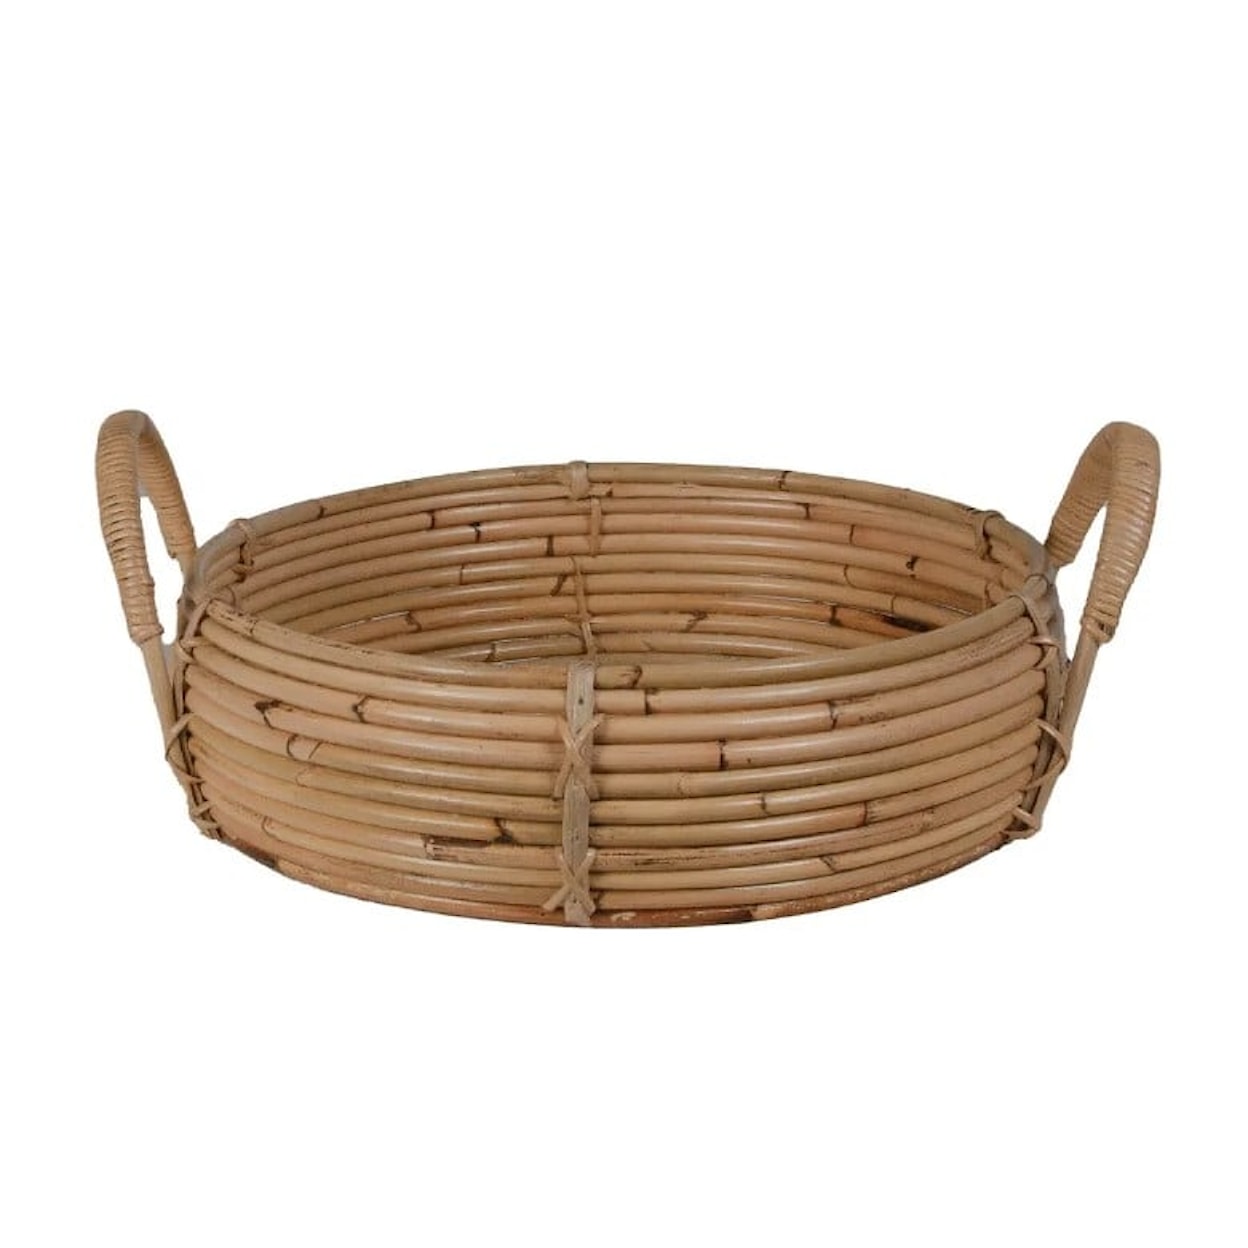 Ibolili Baskets and Sets THERMAL SPA RATTAN TRAY, ROUND